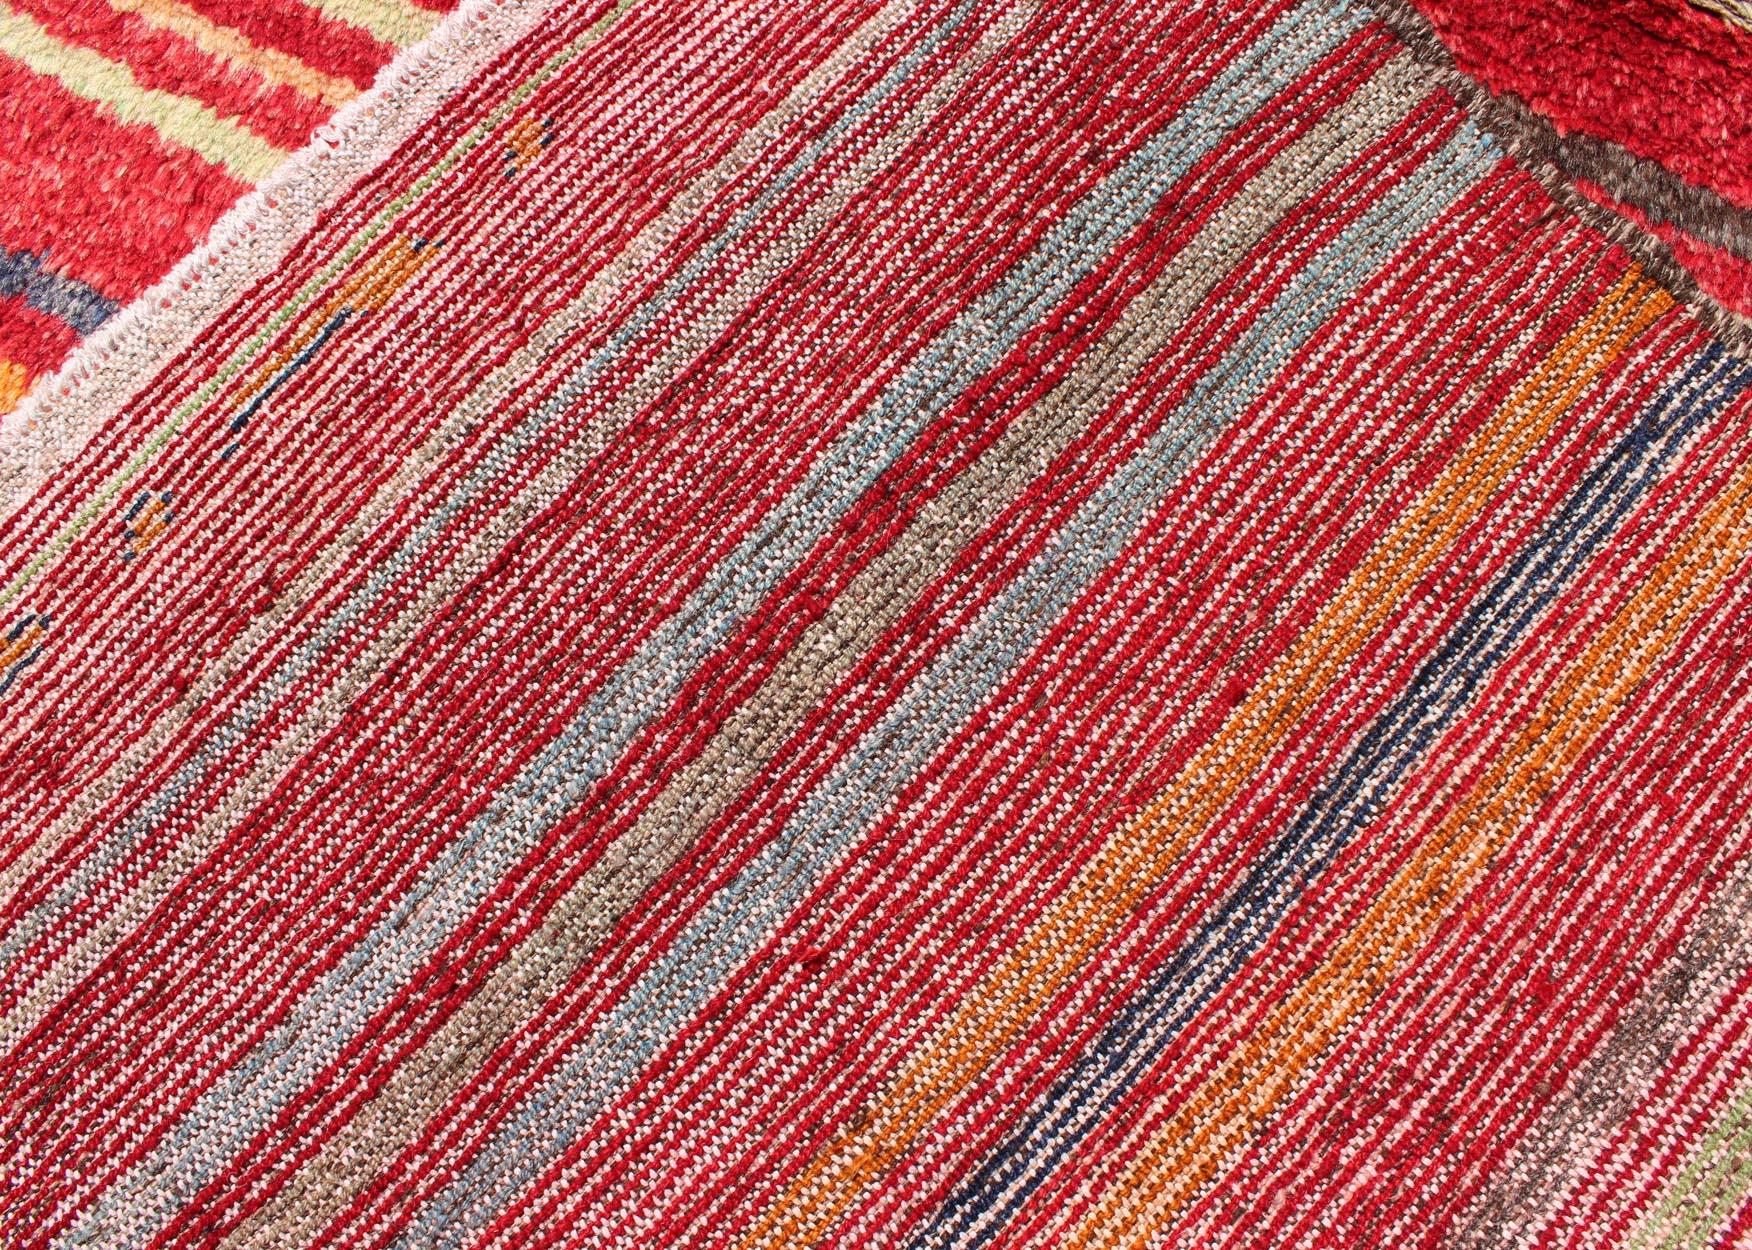 Turkish Tulu Carpet with Colorful Striped Pattern in Red, Orange, Blue, Green For Sale 4